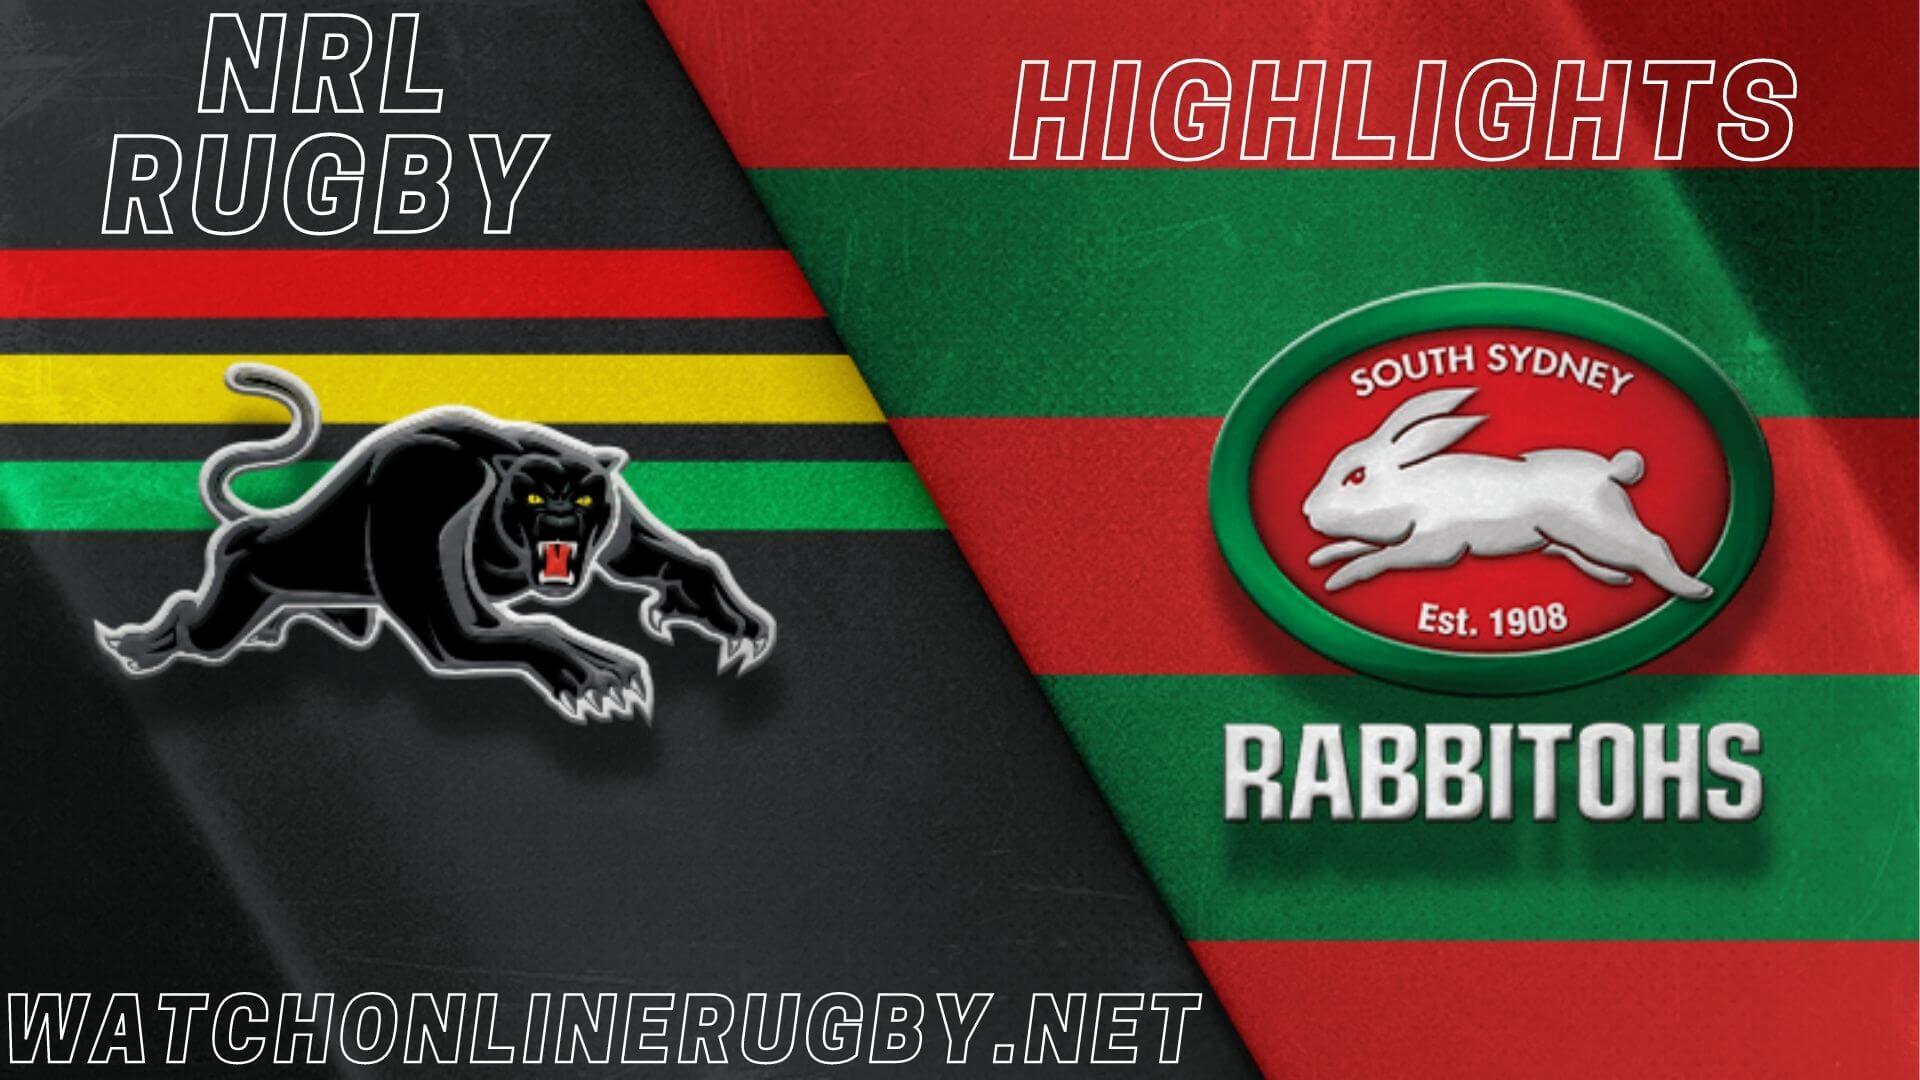 Panthers Vs Rabbitohs Highlights Final Week 3 NRL Rugby